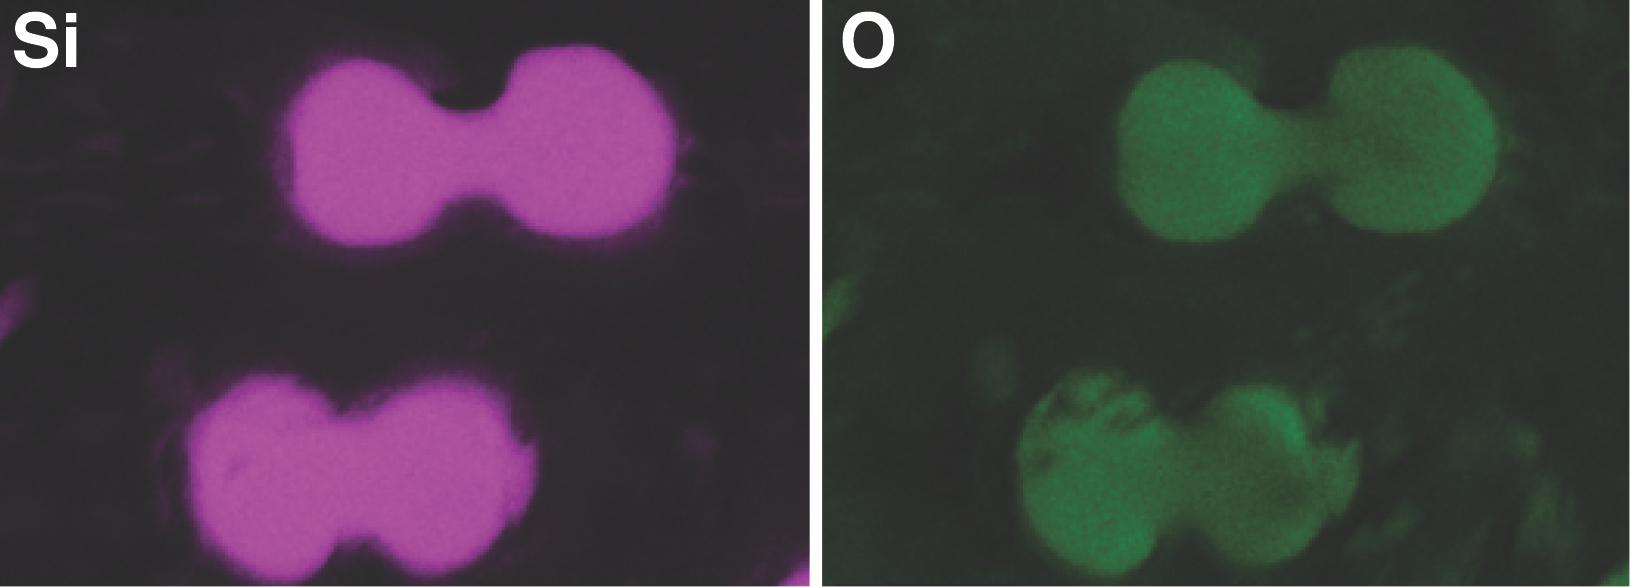 Fluorescent microscopic images show chemical structures called phytoliths composed of silicon, labeled Si and shown in pink, and oxygen, labeled O in green.